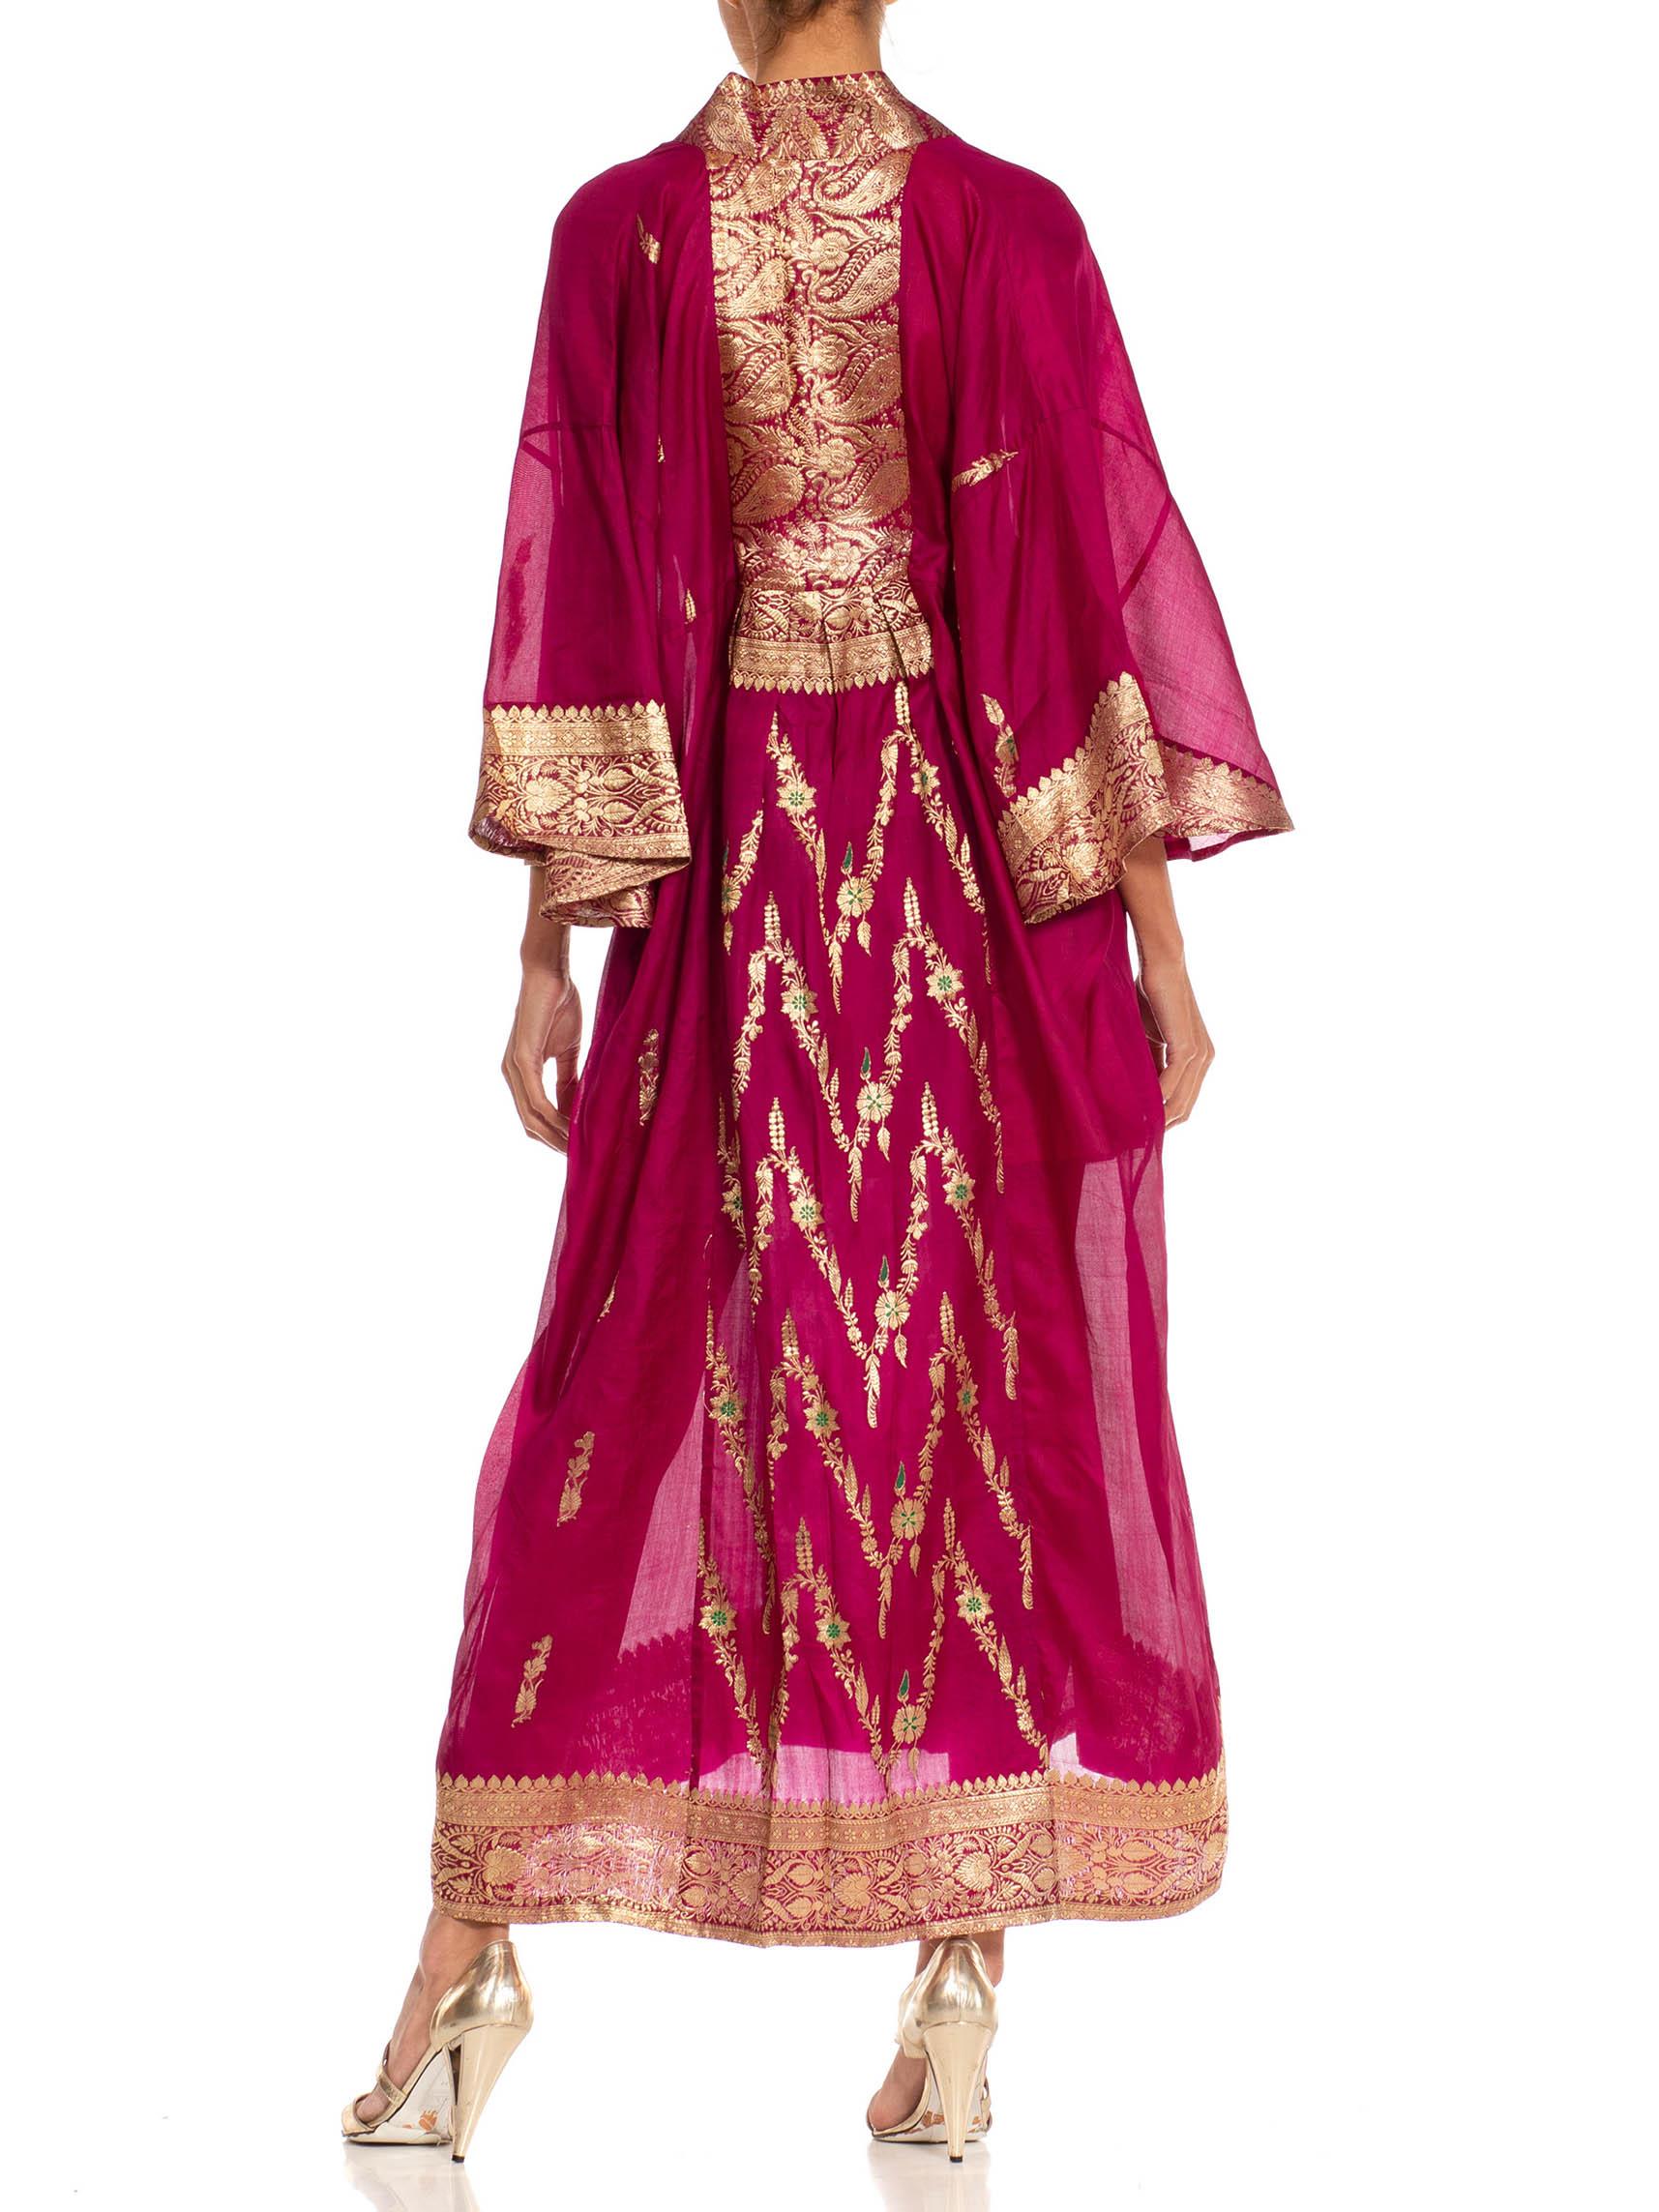 Morphew Collection Fuchsia & Gold Silk Kaftan Made From Vintage Saris For Sale 2